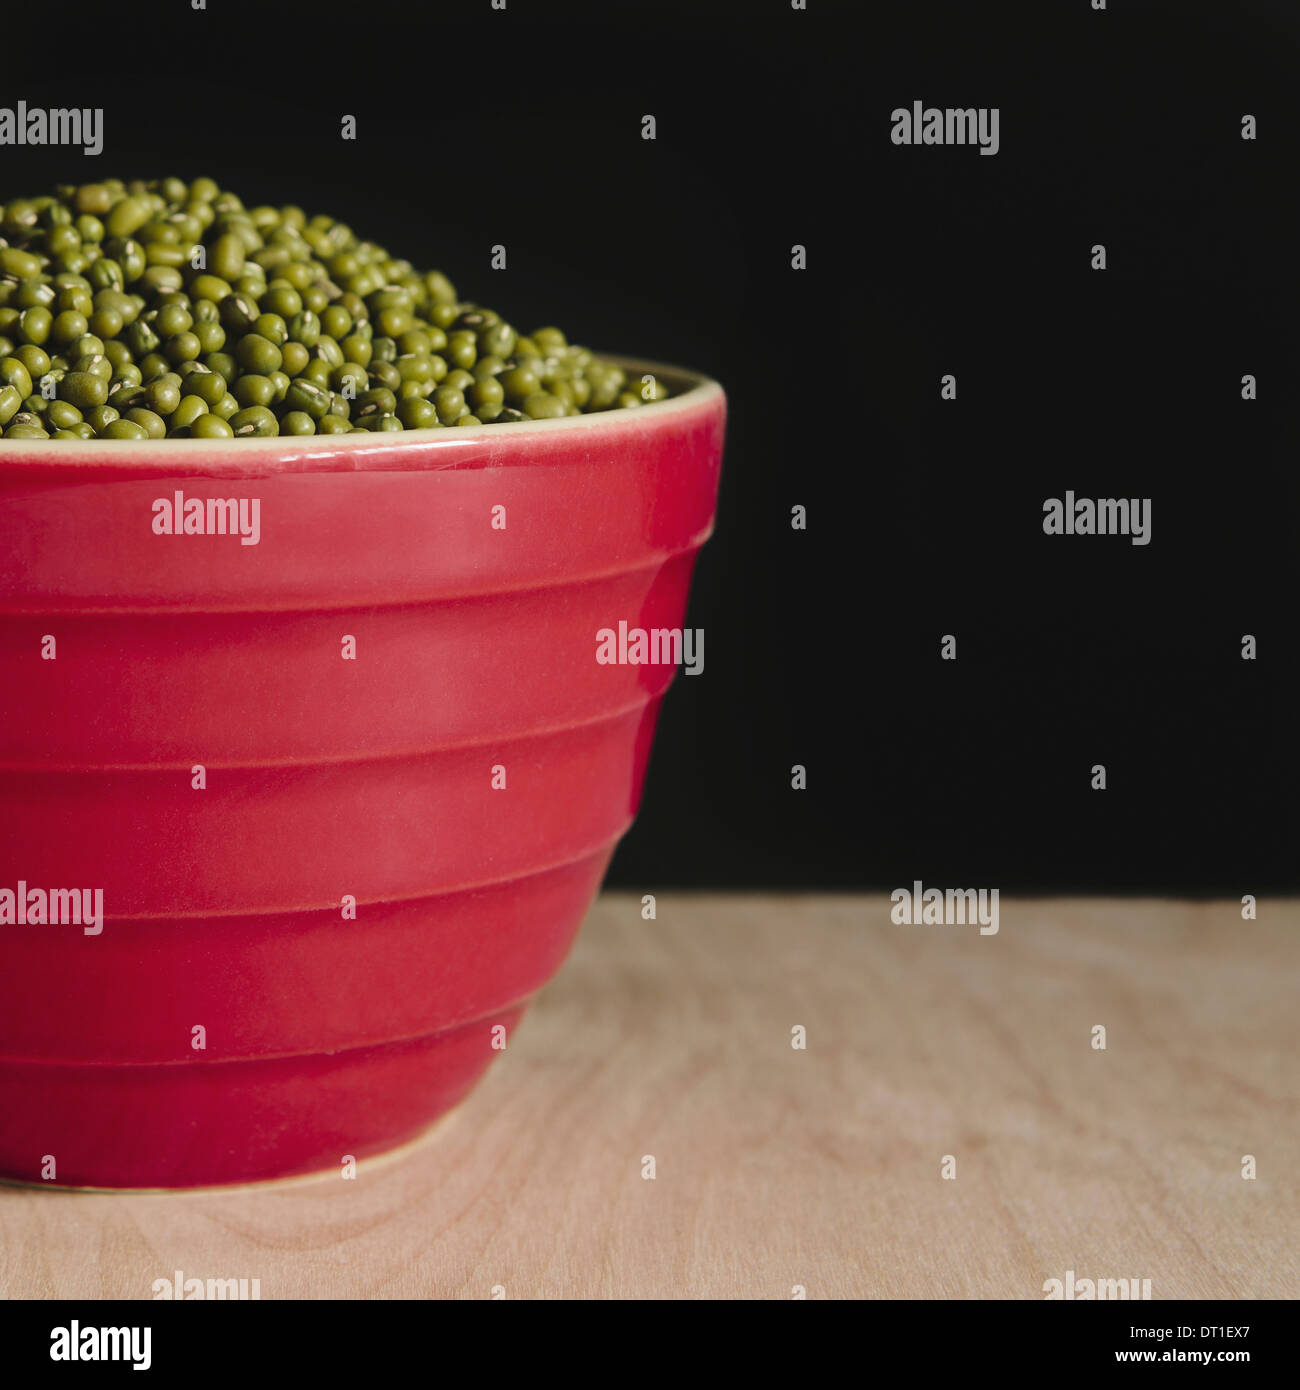 Bowl of mung beans (a legume also know as green gram or golden gram) Stock Photo